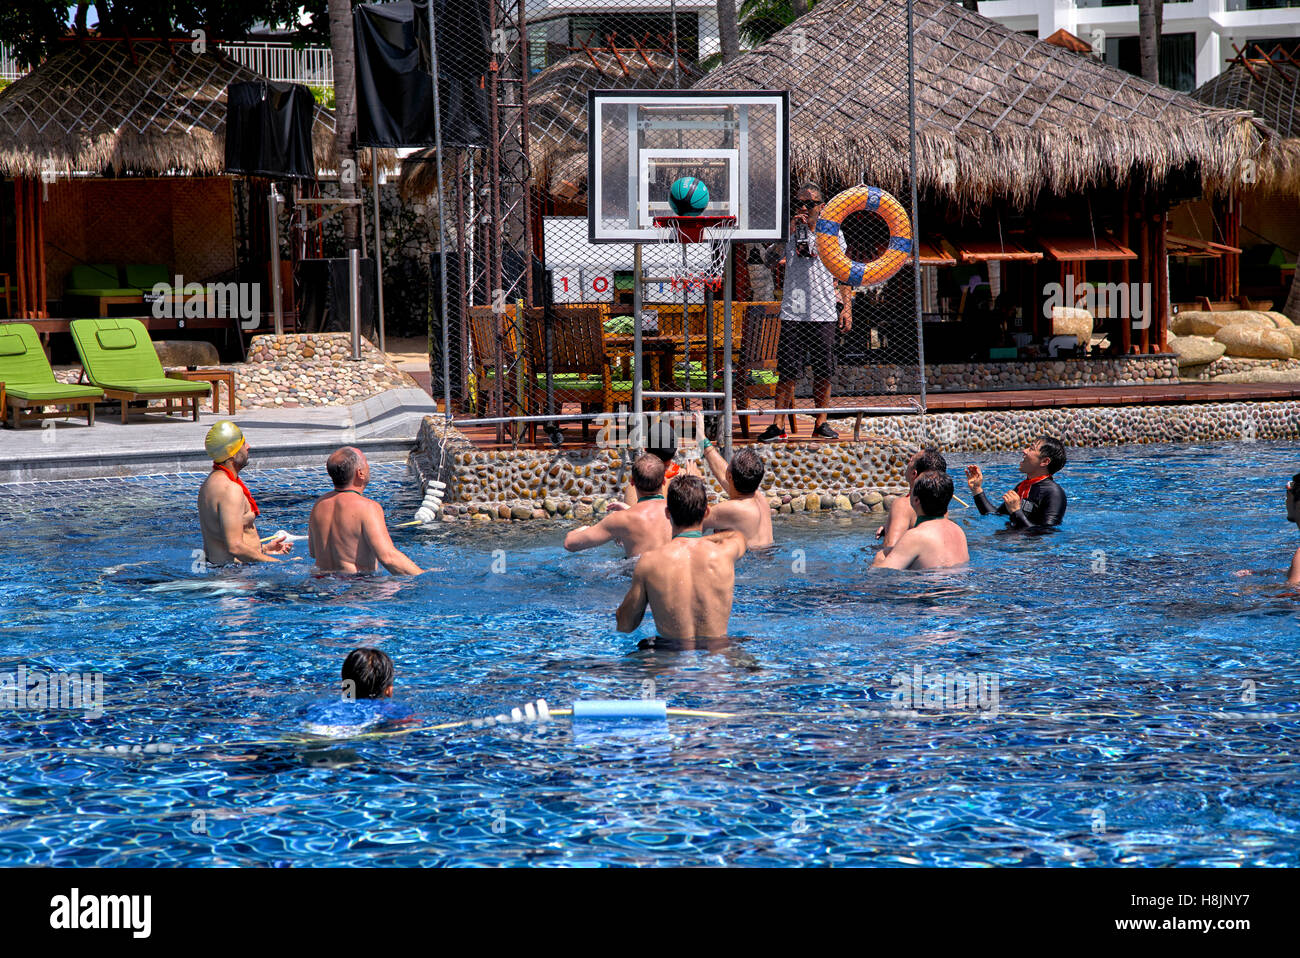 Water polo. Group of male tourists playing water polo at the Hard Rock Hotel, Pattaya Thailand S. E. Asia Stock Photo